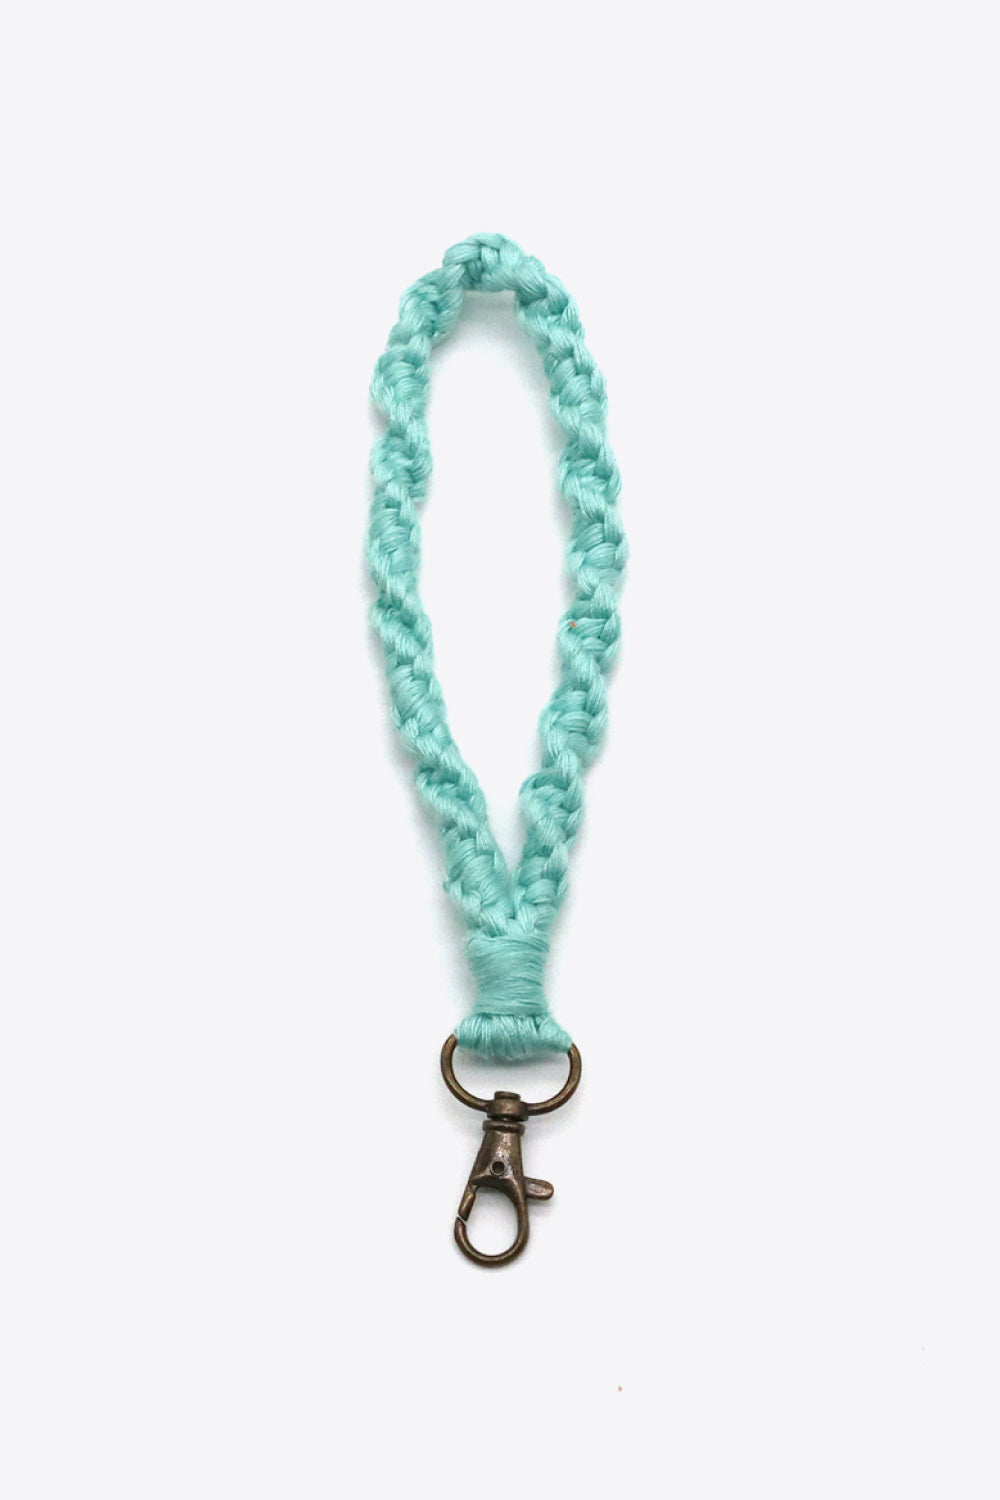 Trendsi Cupid Beauty Supplies Tiffany Blue / One Size Keychains 4-Pack Handmade Keychain, Color Varies